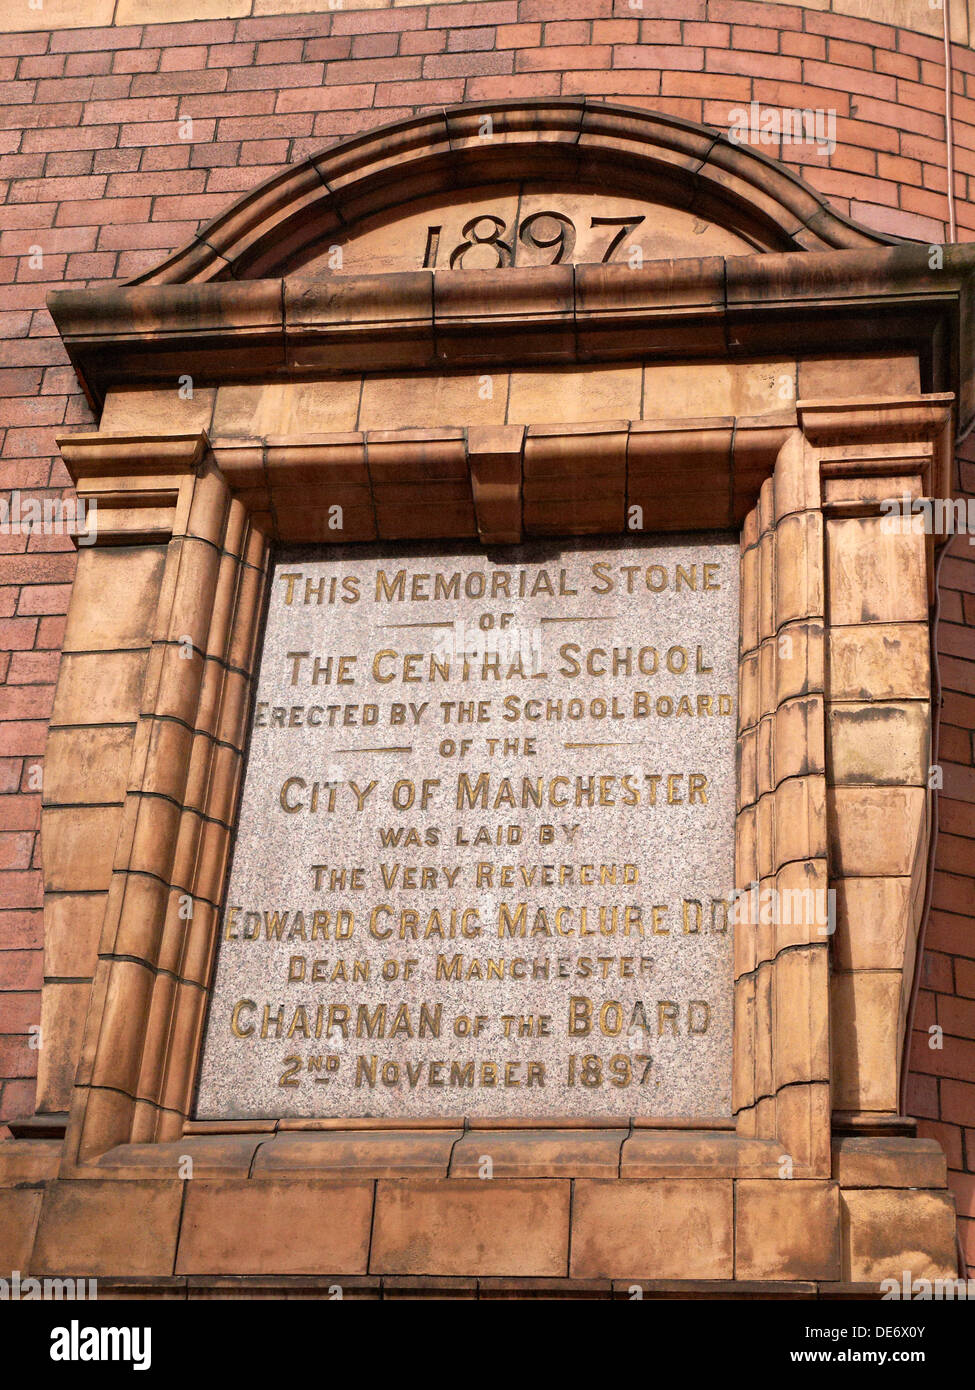 Memorial stone in The Central School as part of the University of Manchester UK Stock Photo